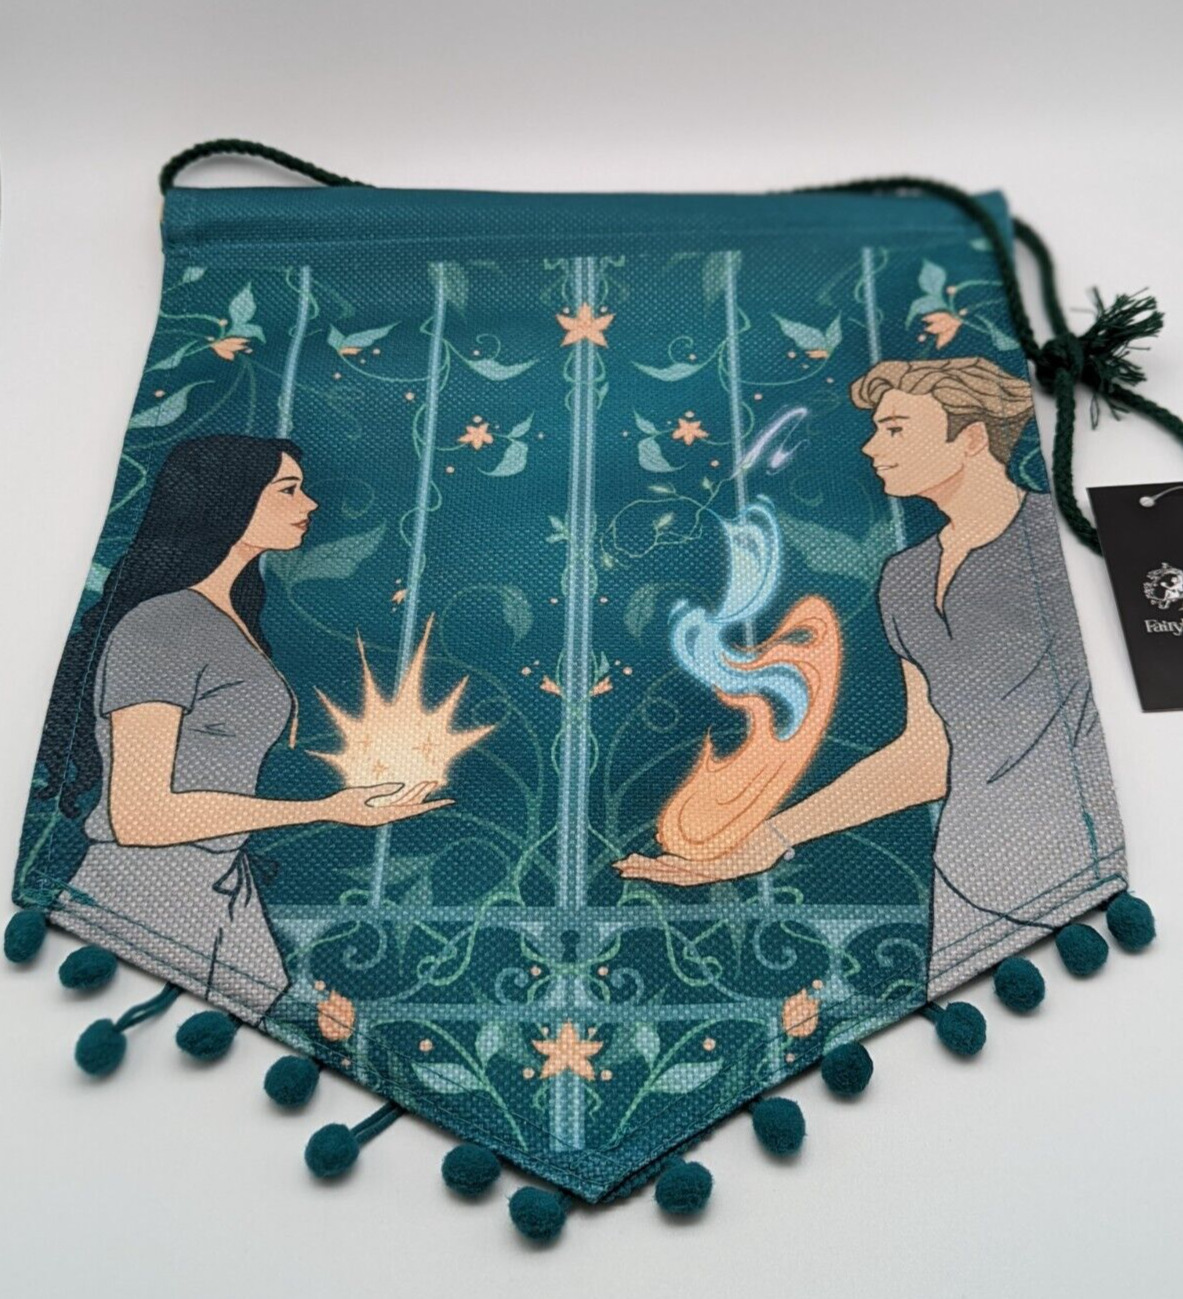 Fairyloot Exclusive Fabric Pin Banner Display The Prison Healer Lynette Noni